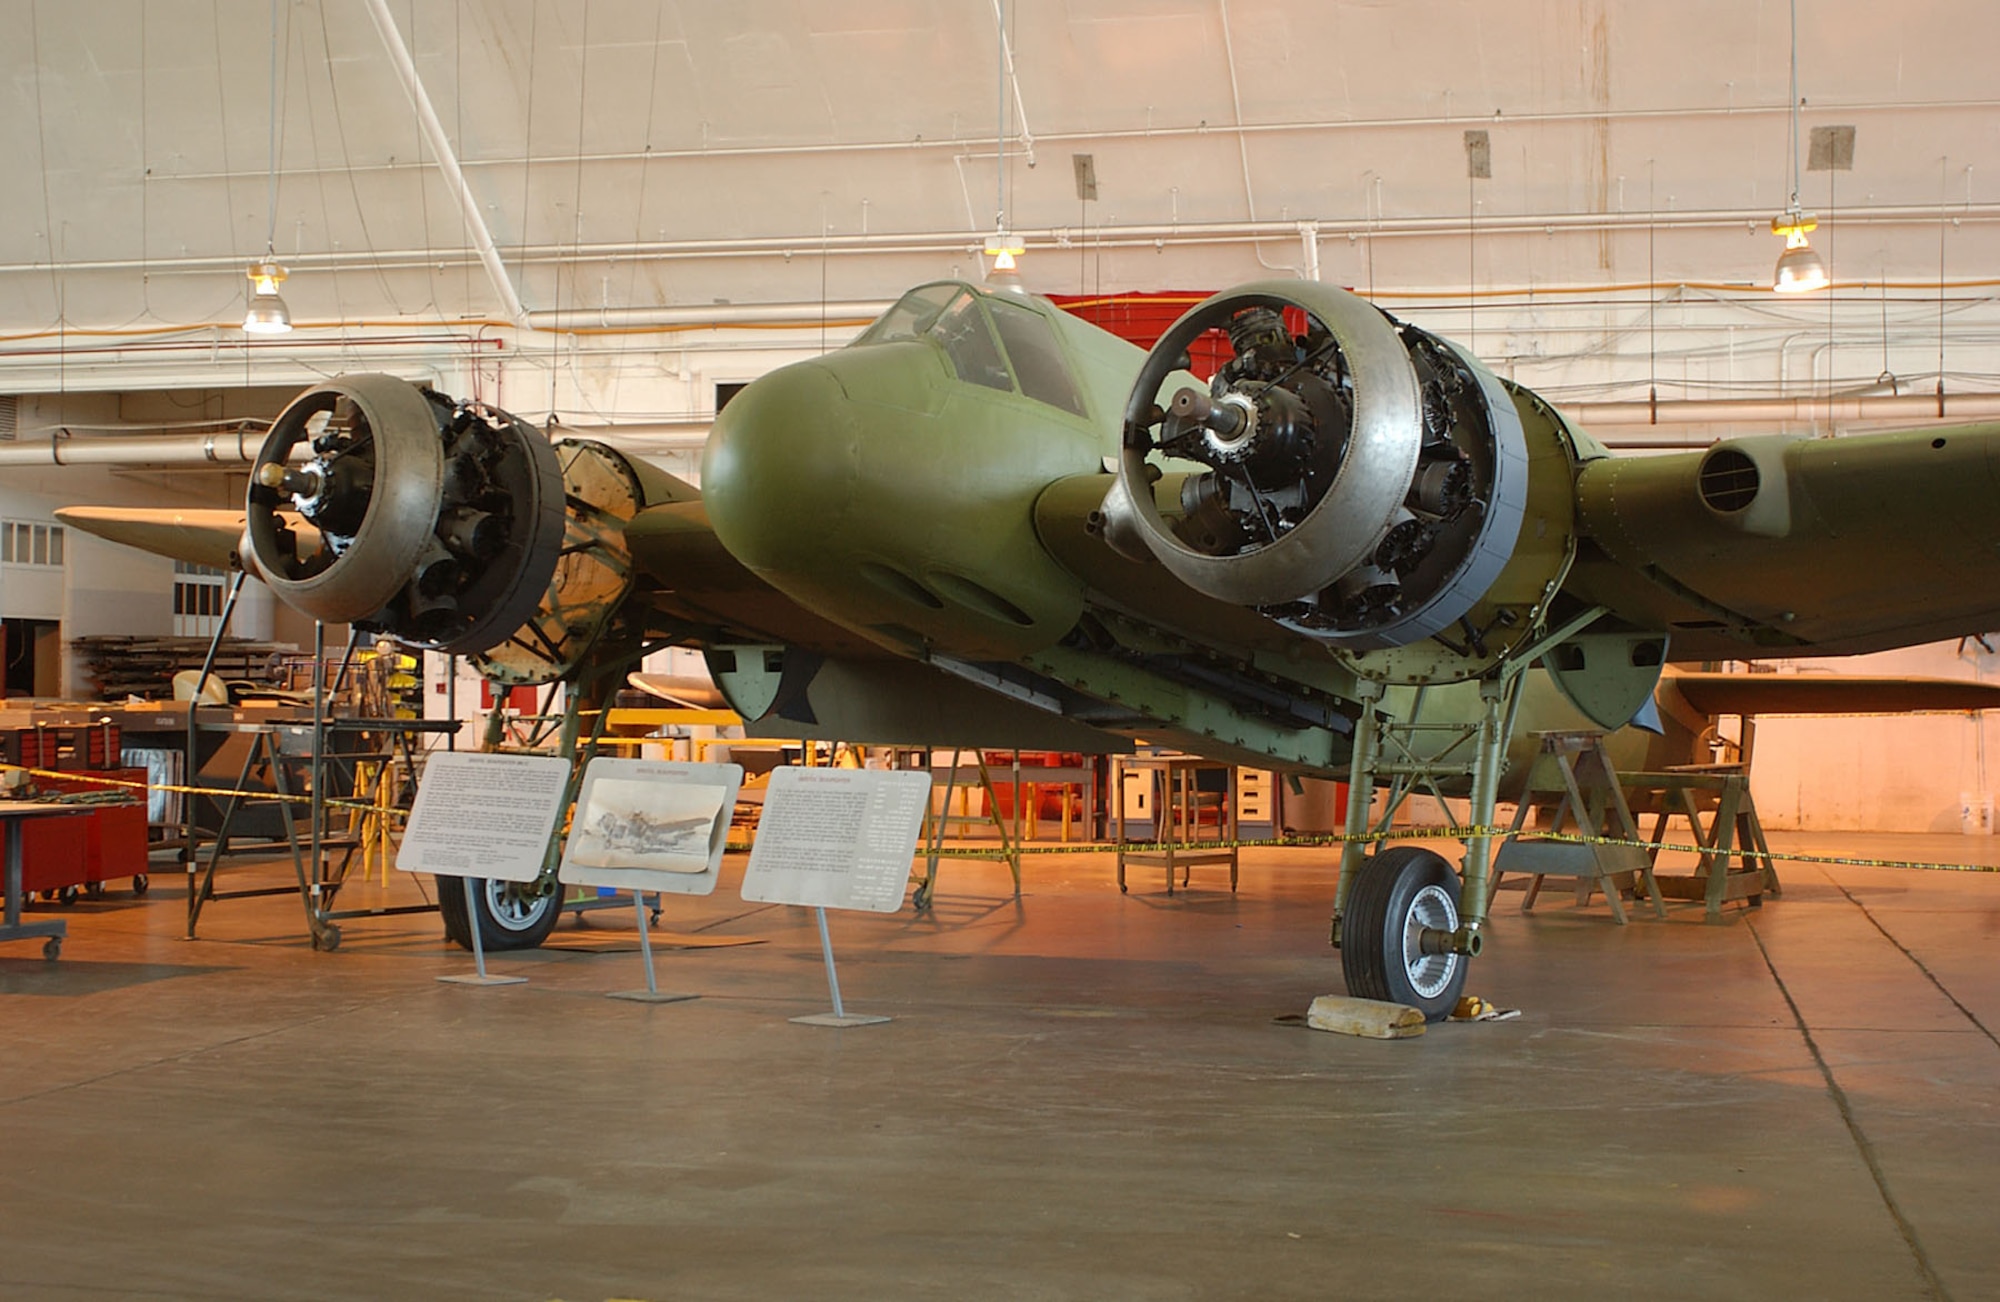 DAYTON, Ohio (07/2005) -- The Bristol Beaufighter undergoing restoration at the National Museum of the United States Air Force. (U.S. Air Force photo)